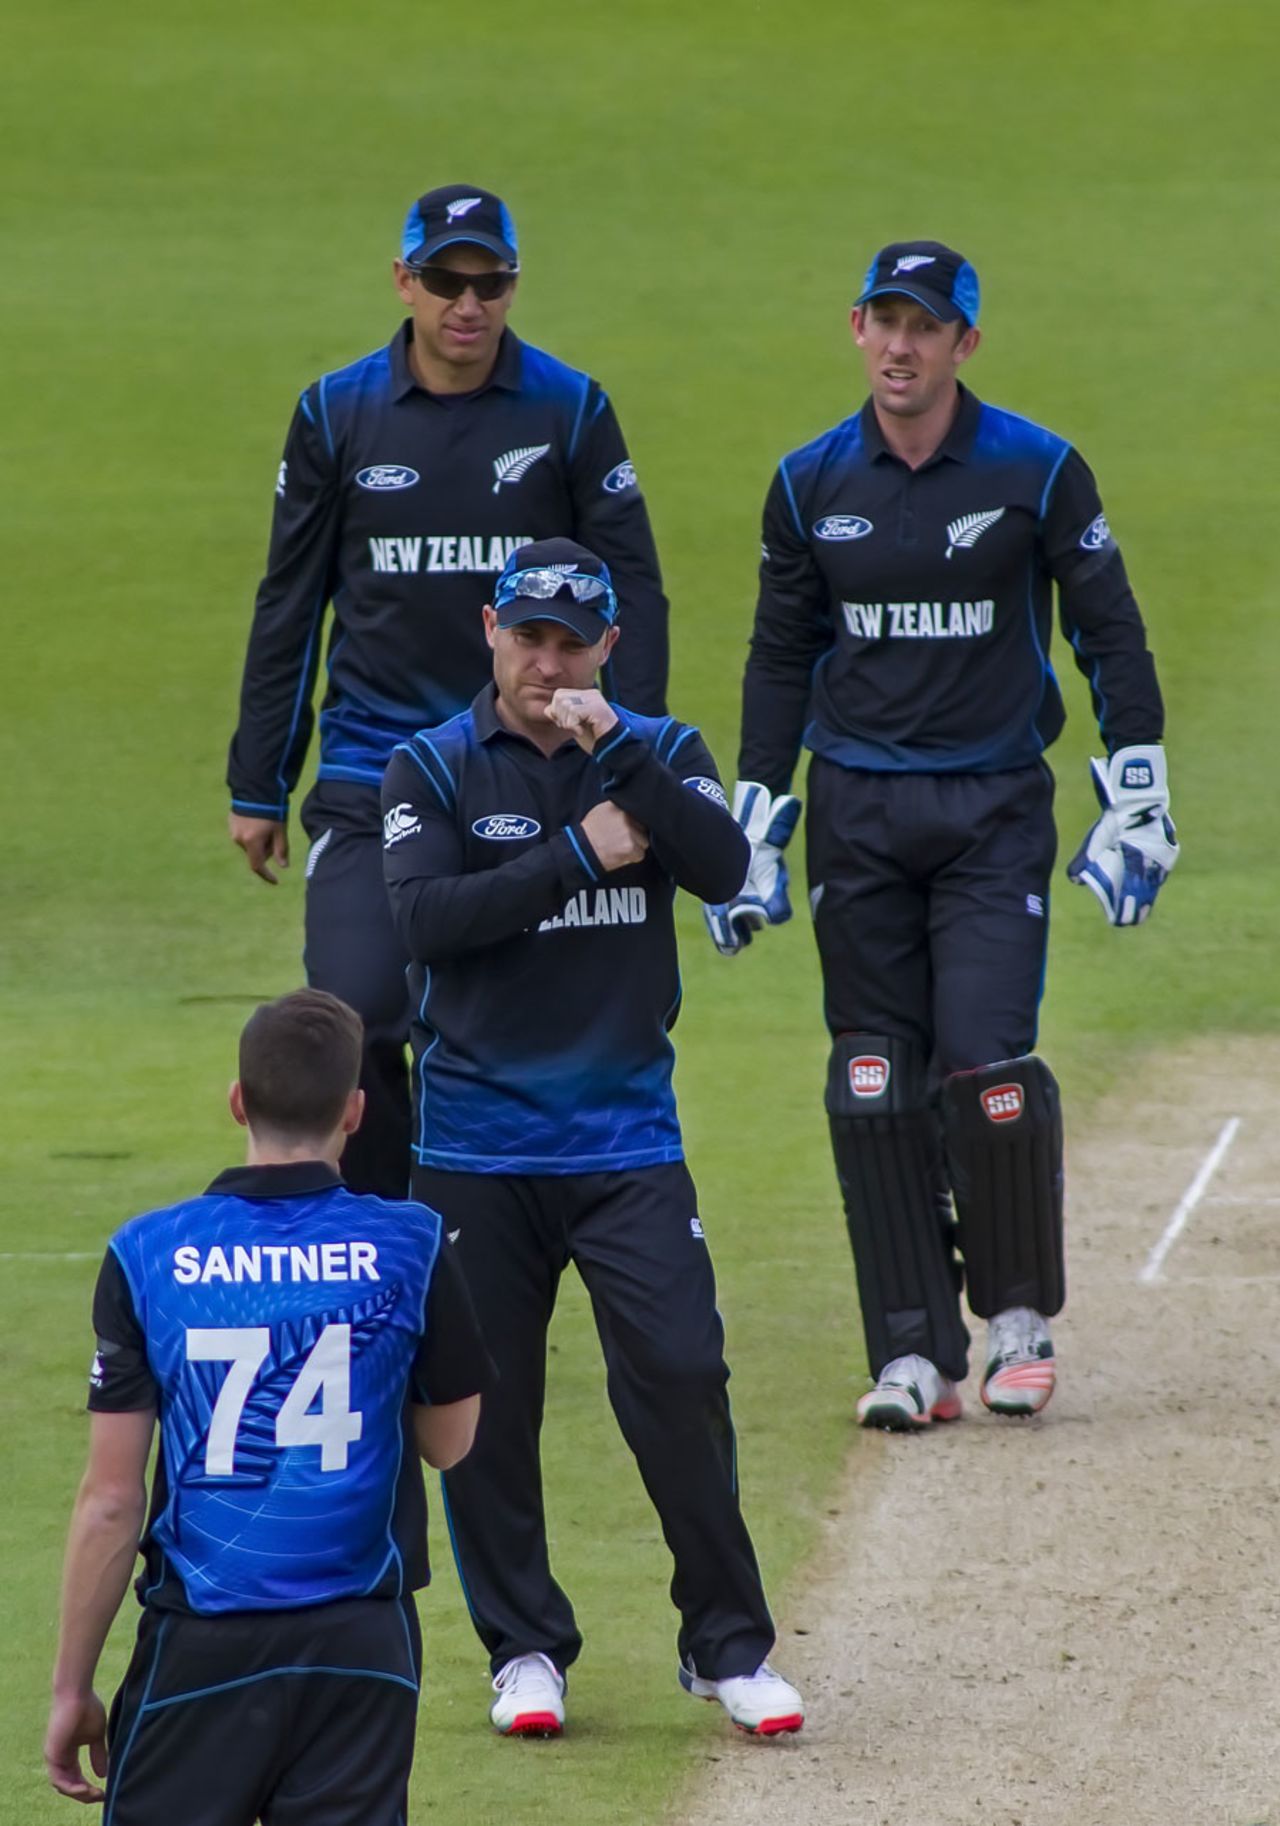 Mitchell Santner got his maiden ODI wicket after a review, England v New Zealand, 1st ODI, Edgbaston, June 9, 2015